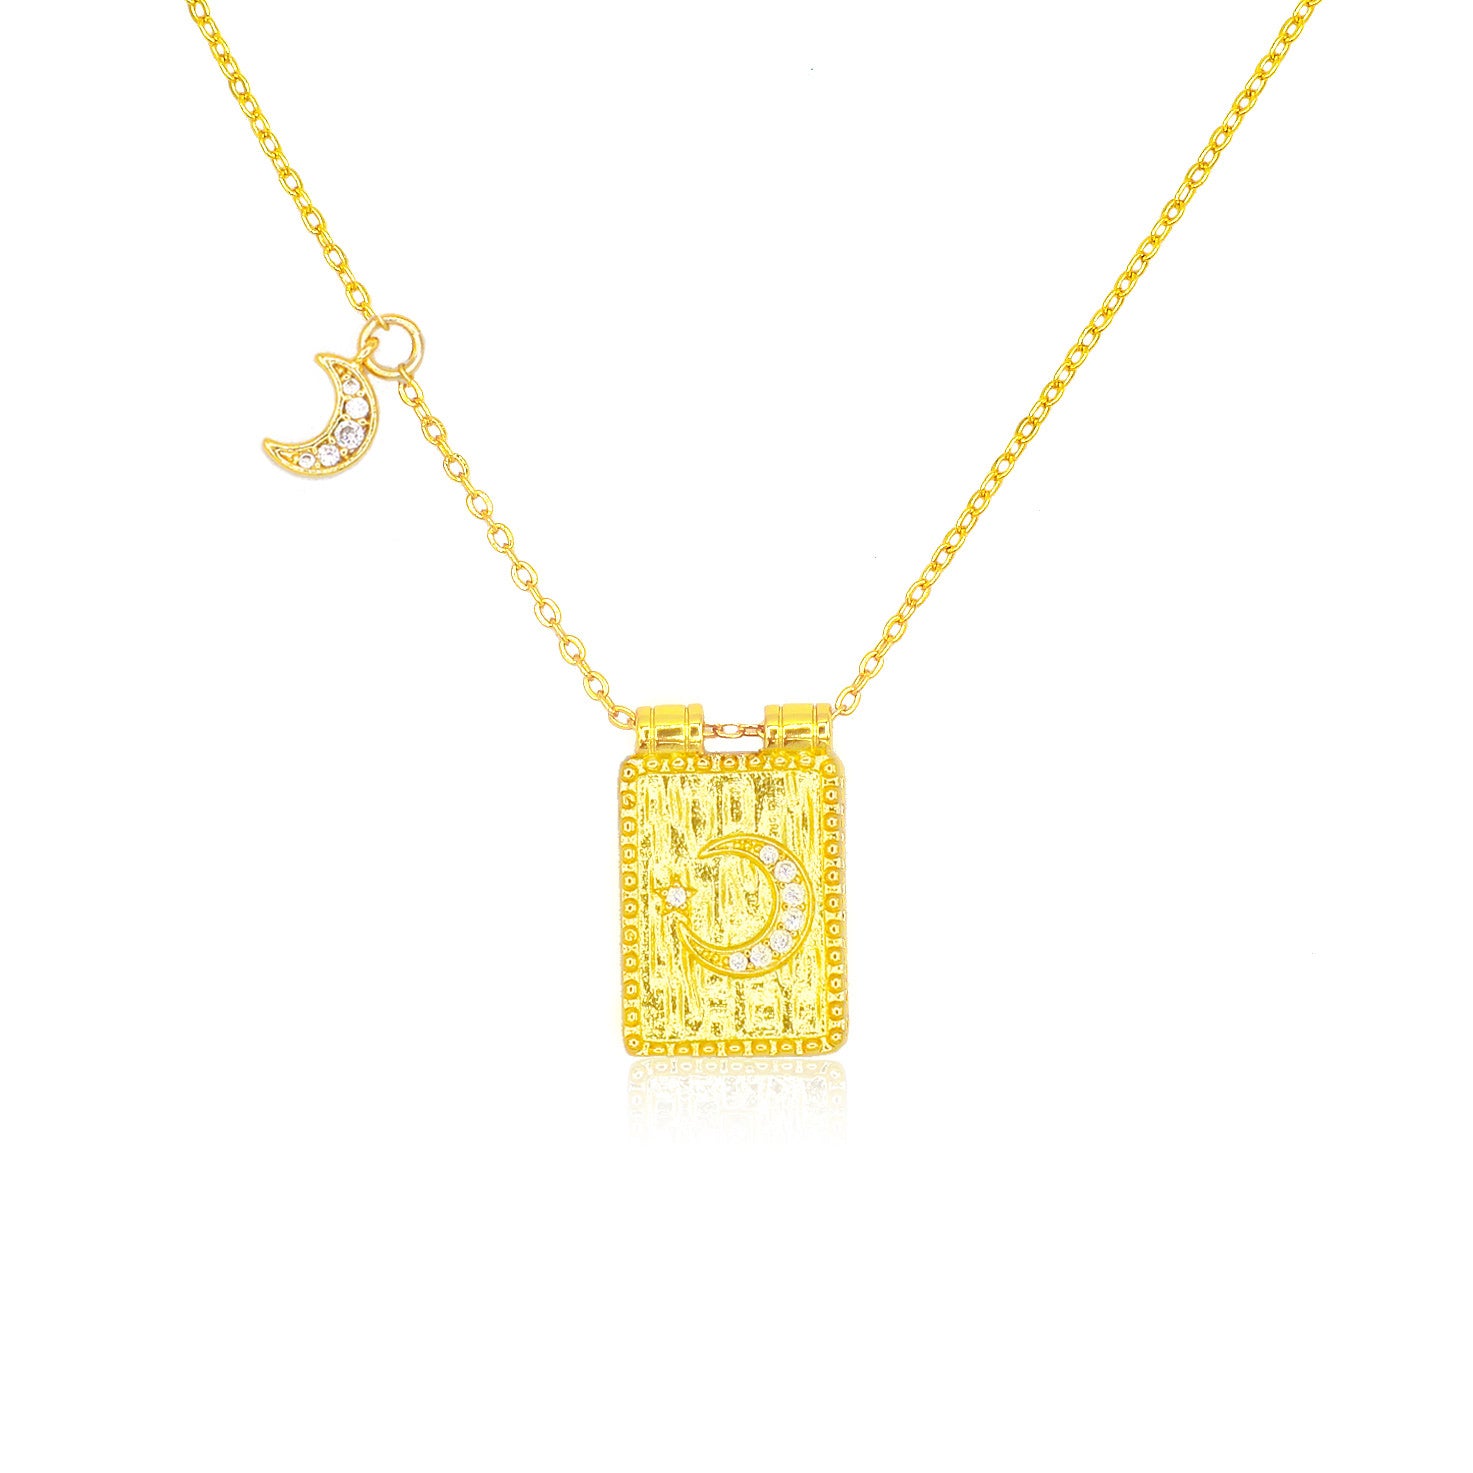 Shimmering Charm Necklace